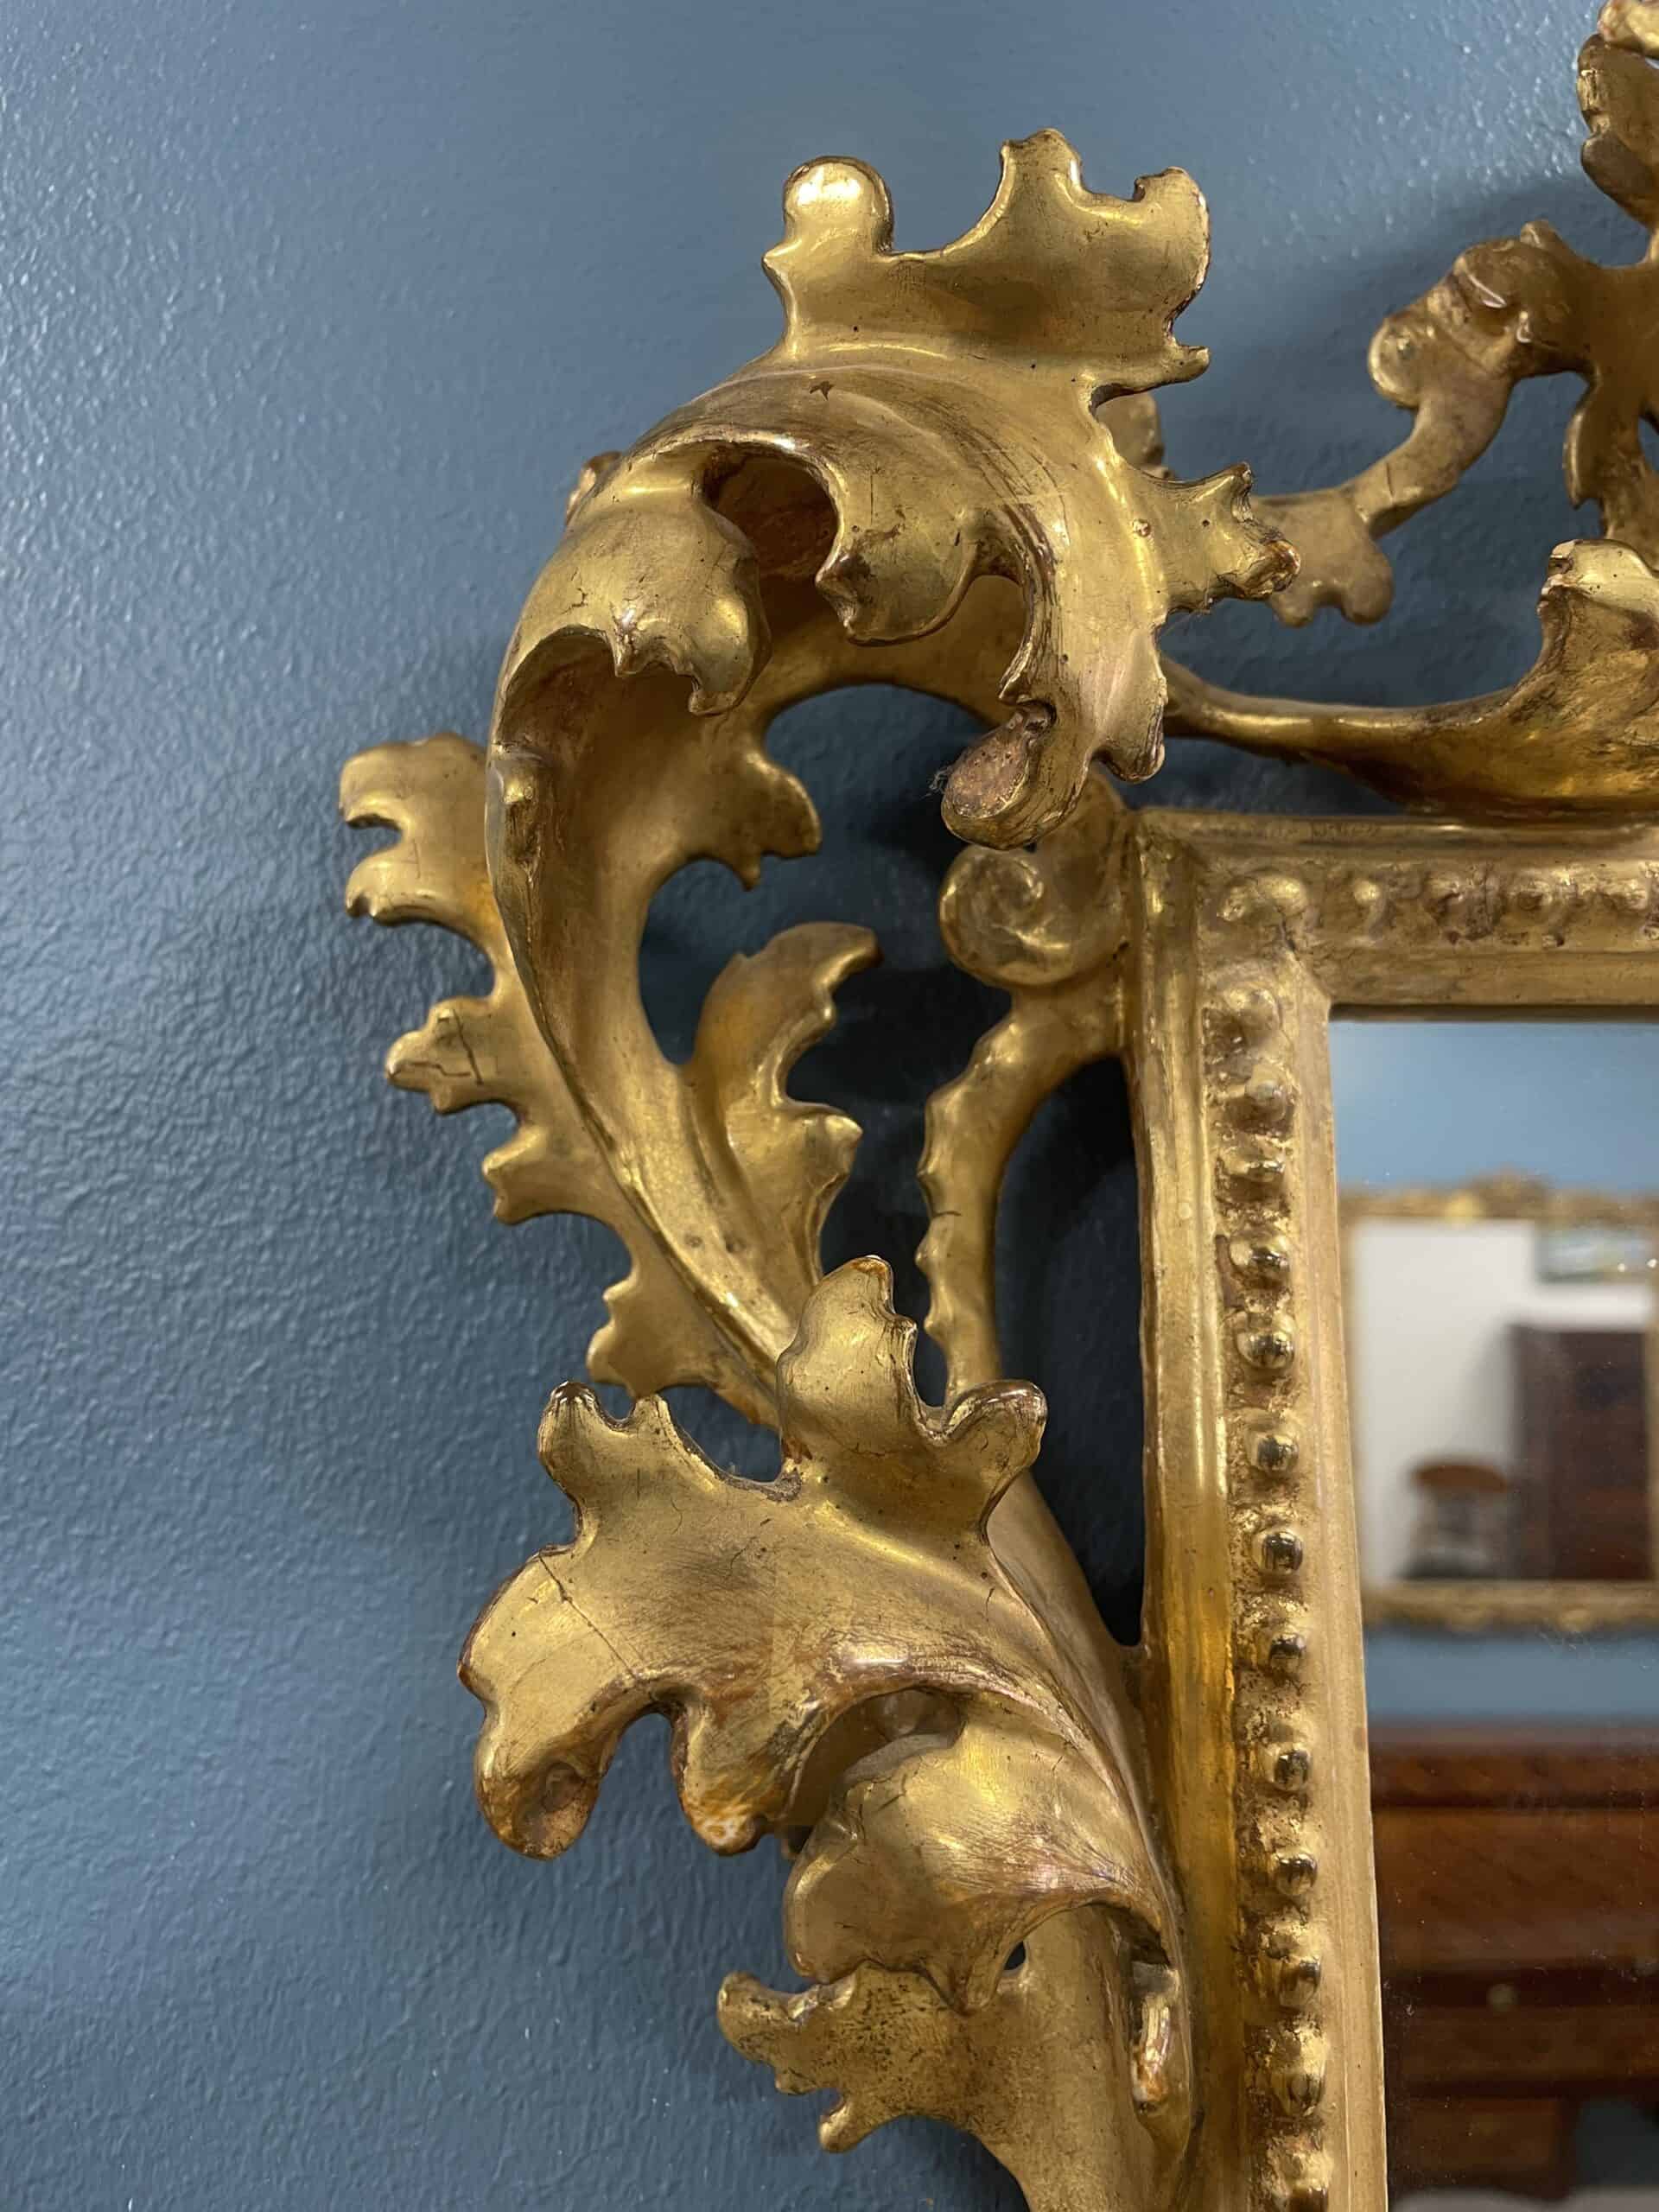 Large 19th Century Louis Philippe Gilt and Ebonized Wall 